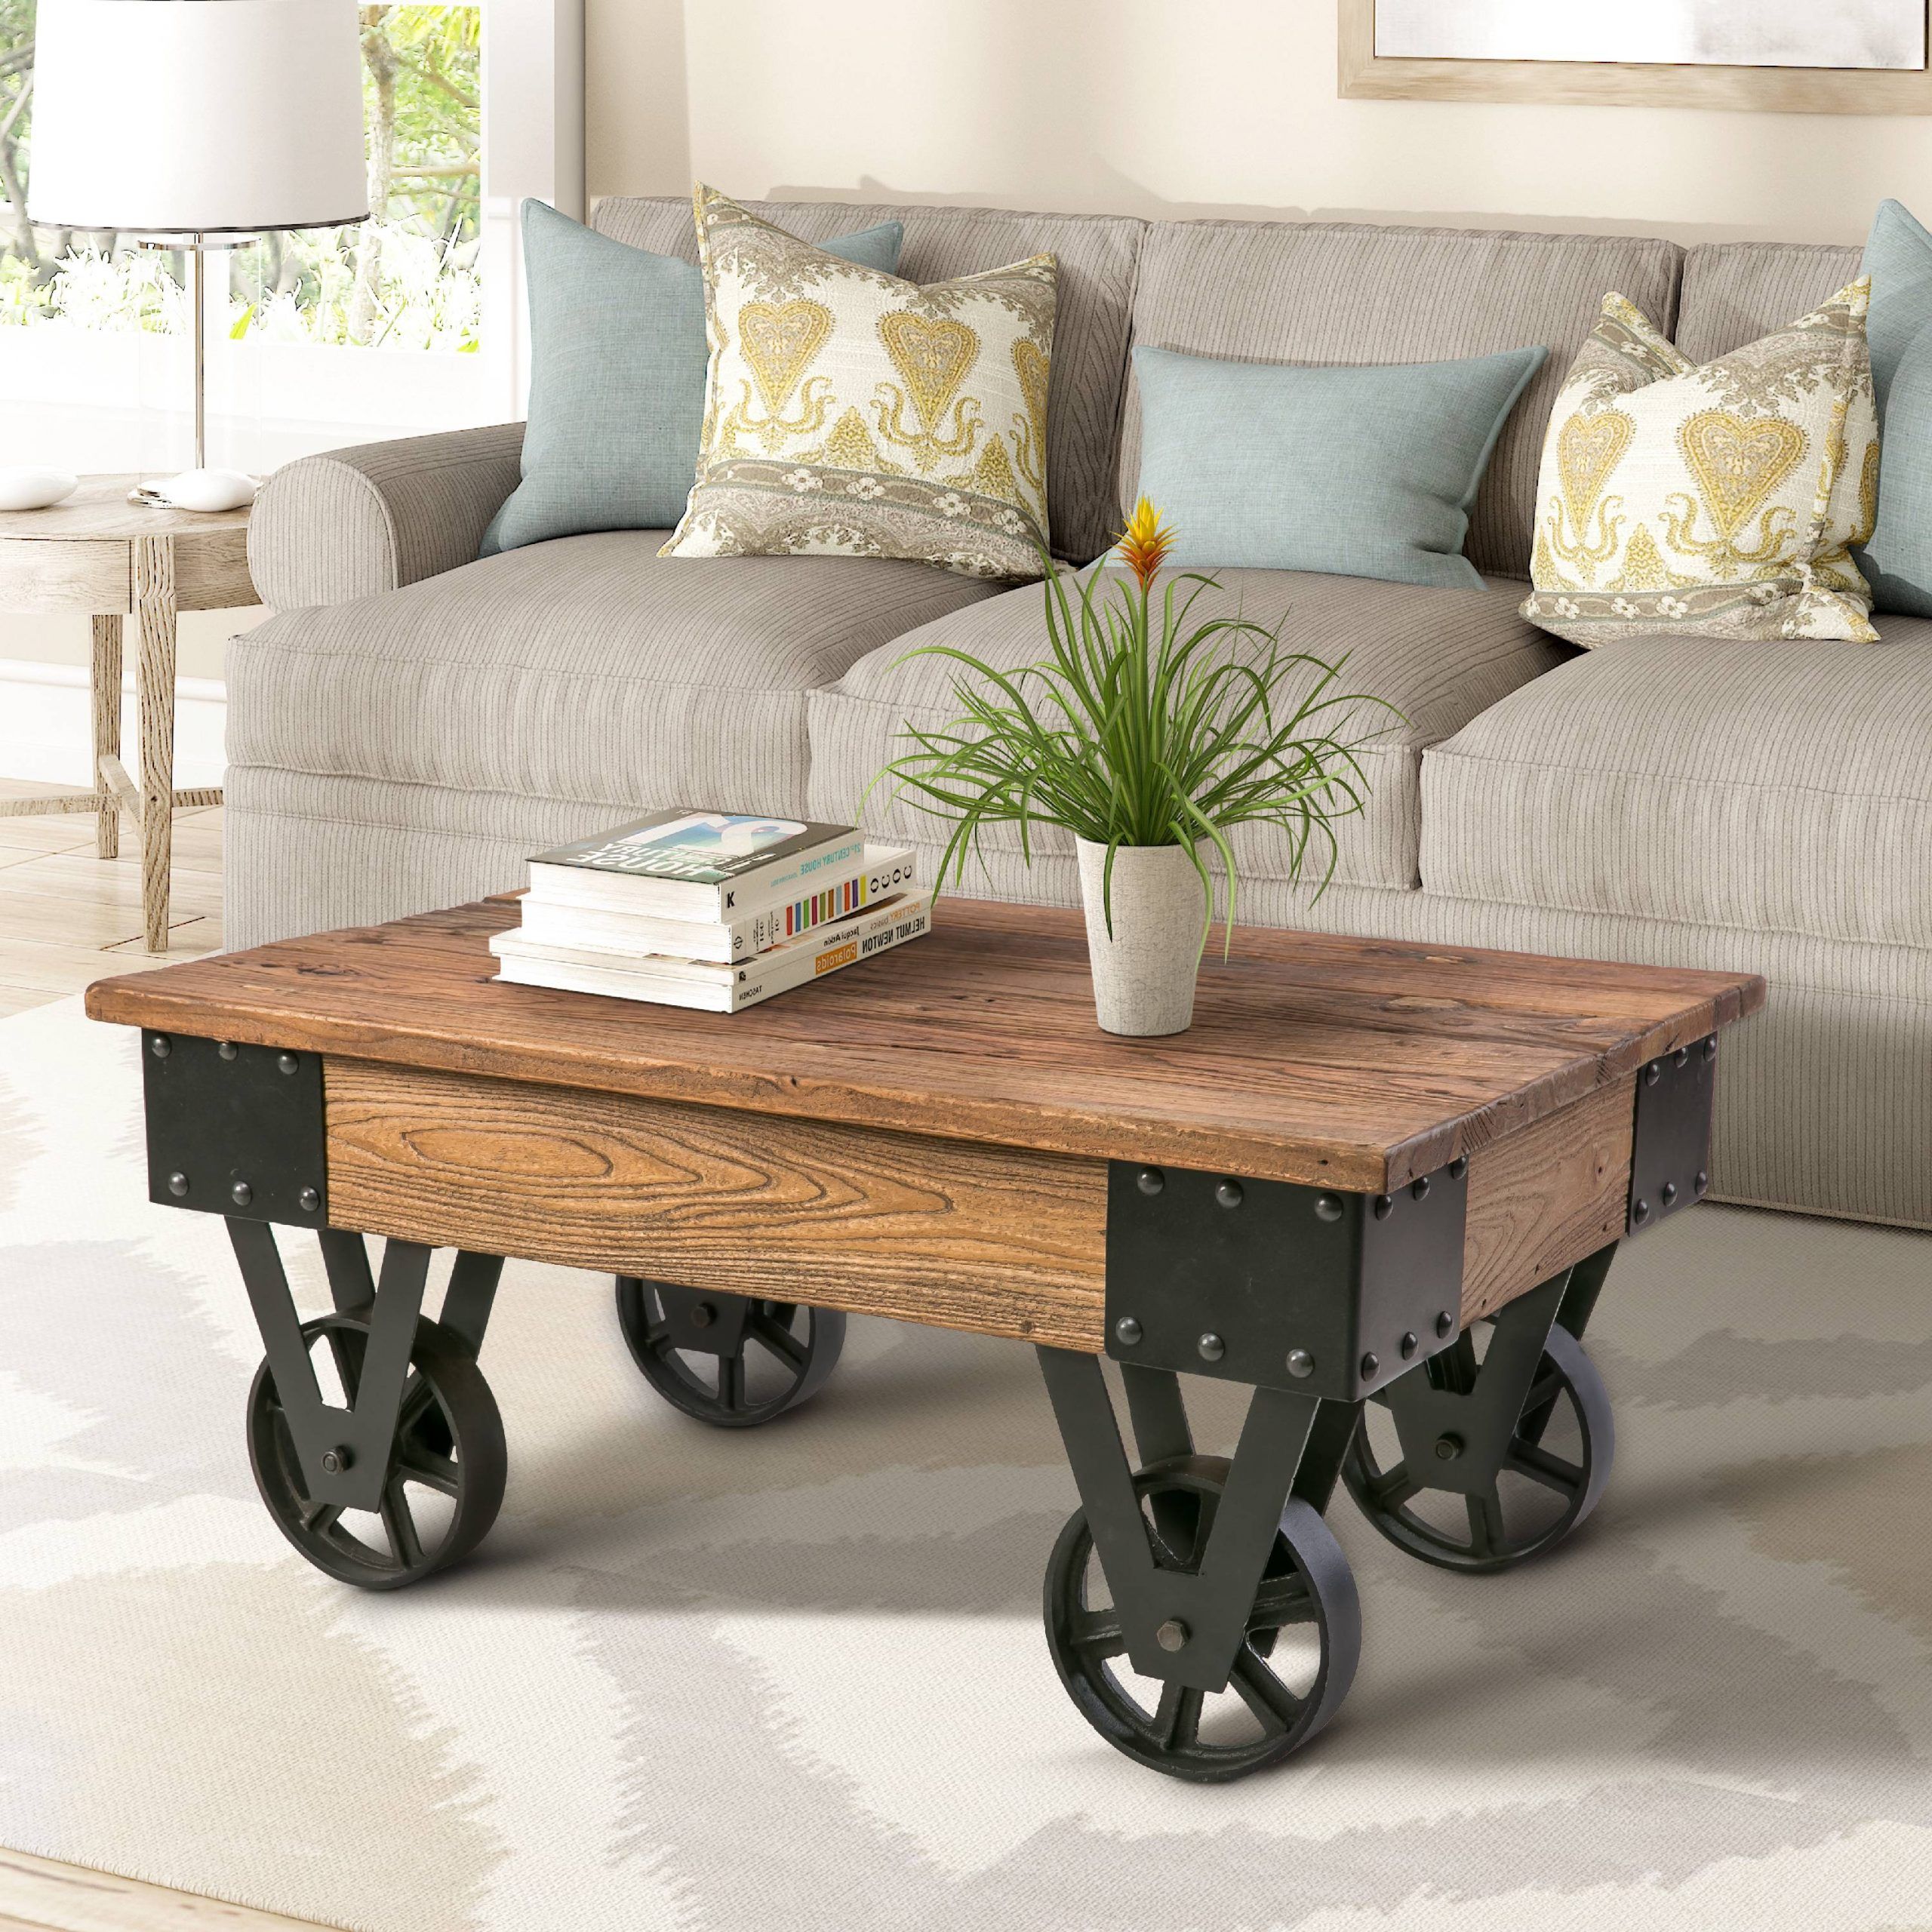 Harper&bright Designs Solid Wood Coffee Table With Metal Intended For Metal And Oak Coffee Tables (View 15 of 15)